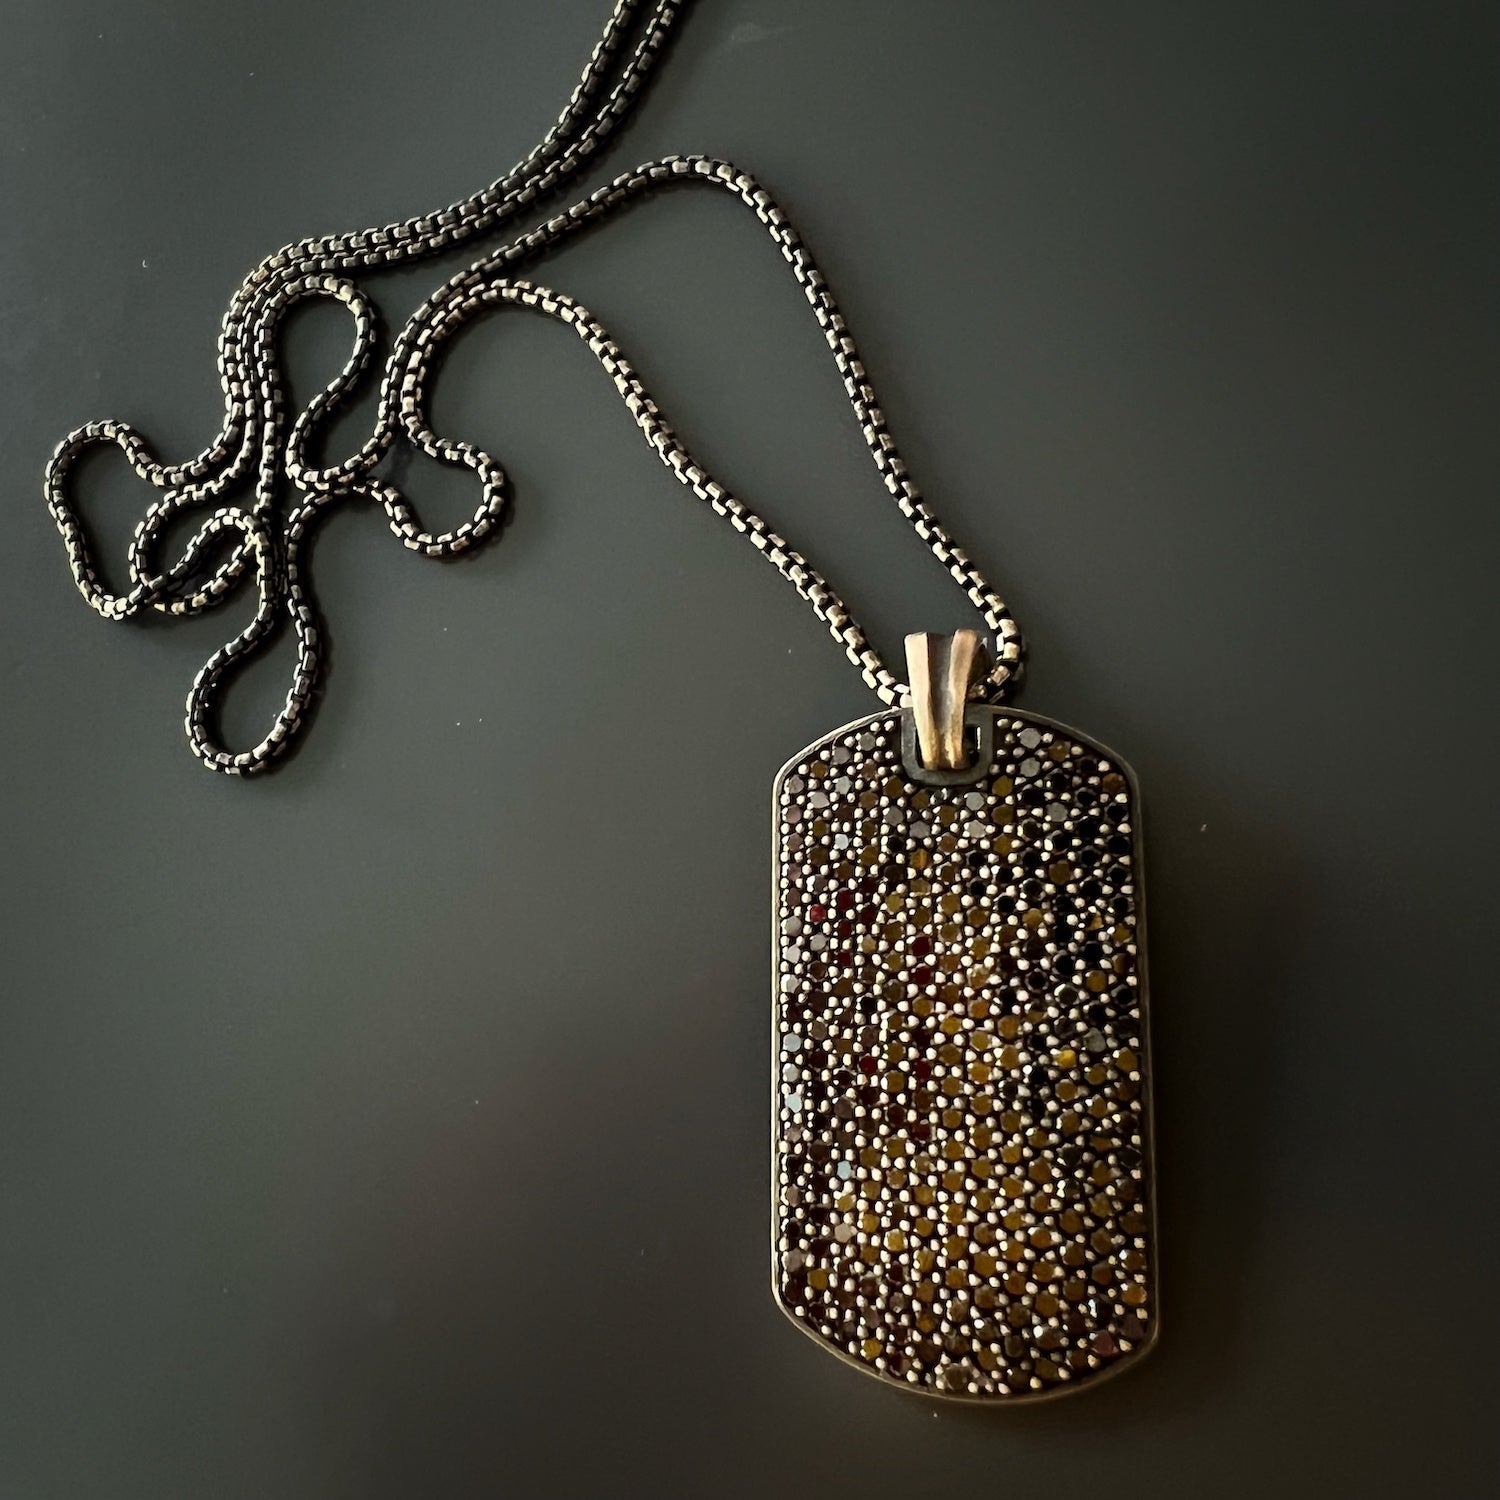 The Dog Tag Black Diamond Necklace displayed on a jewelry stand, allowing for a full view of its captivating design and craftsmanship.